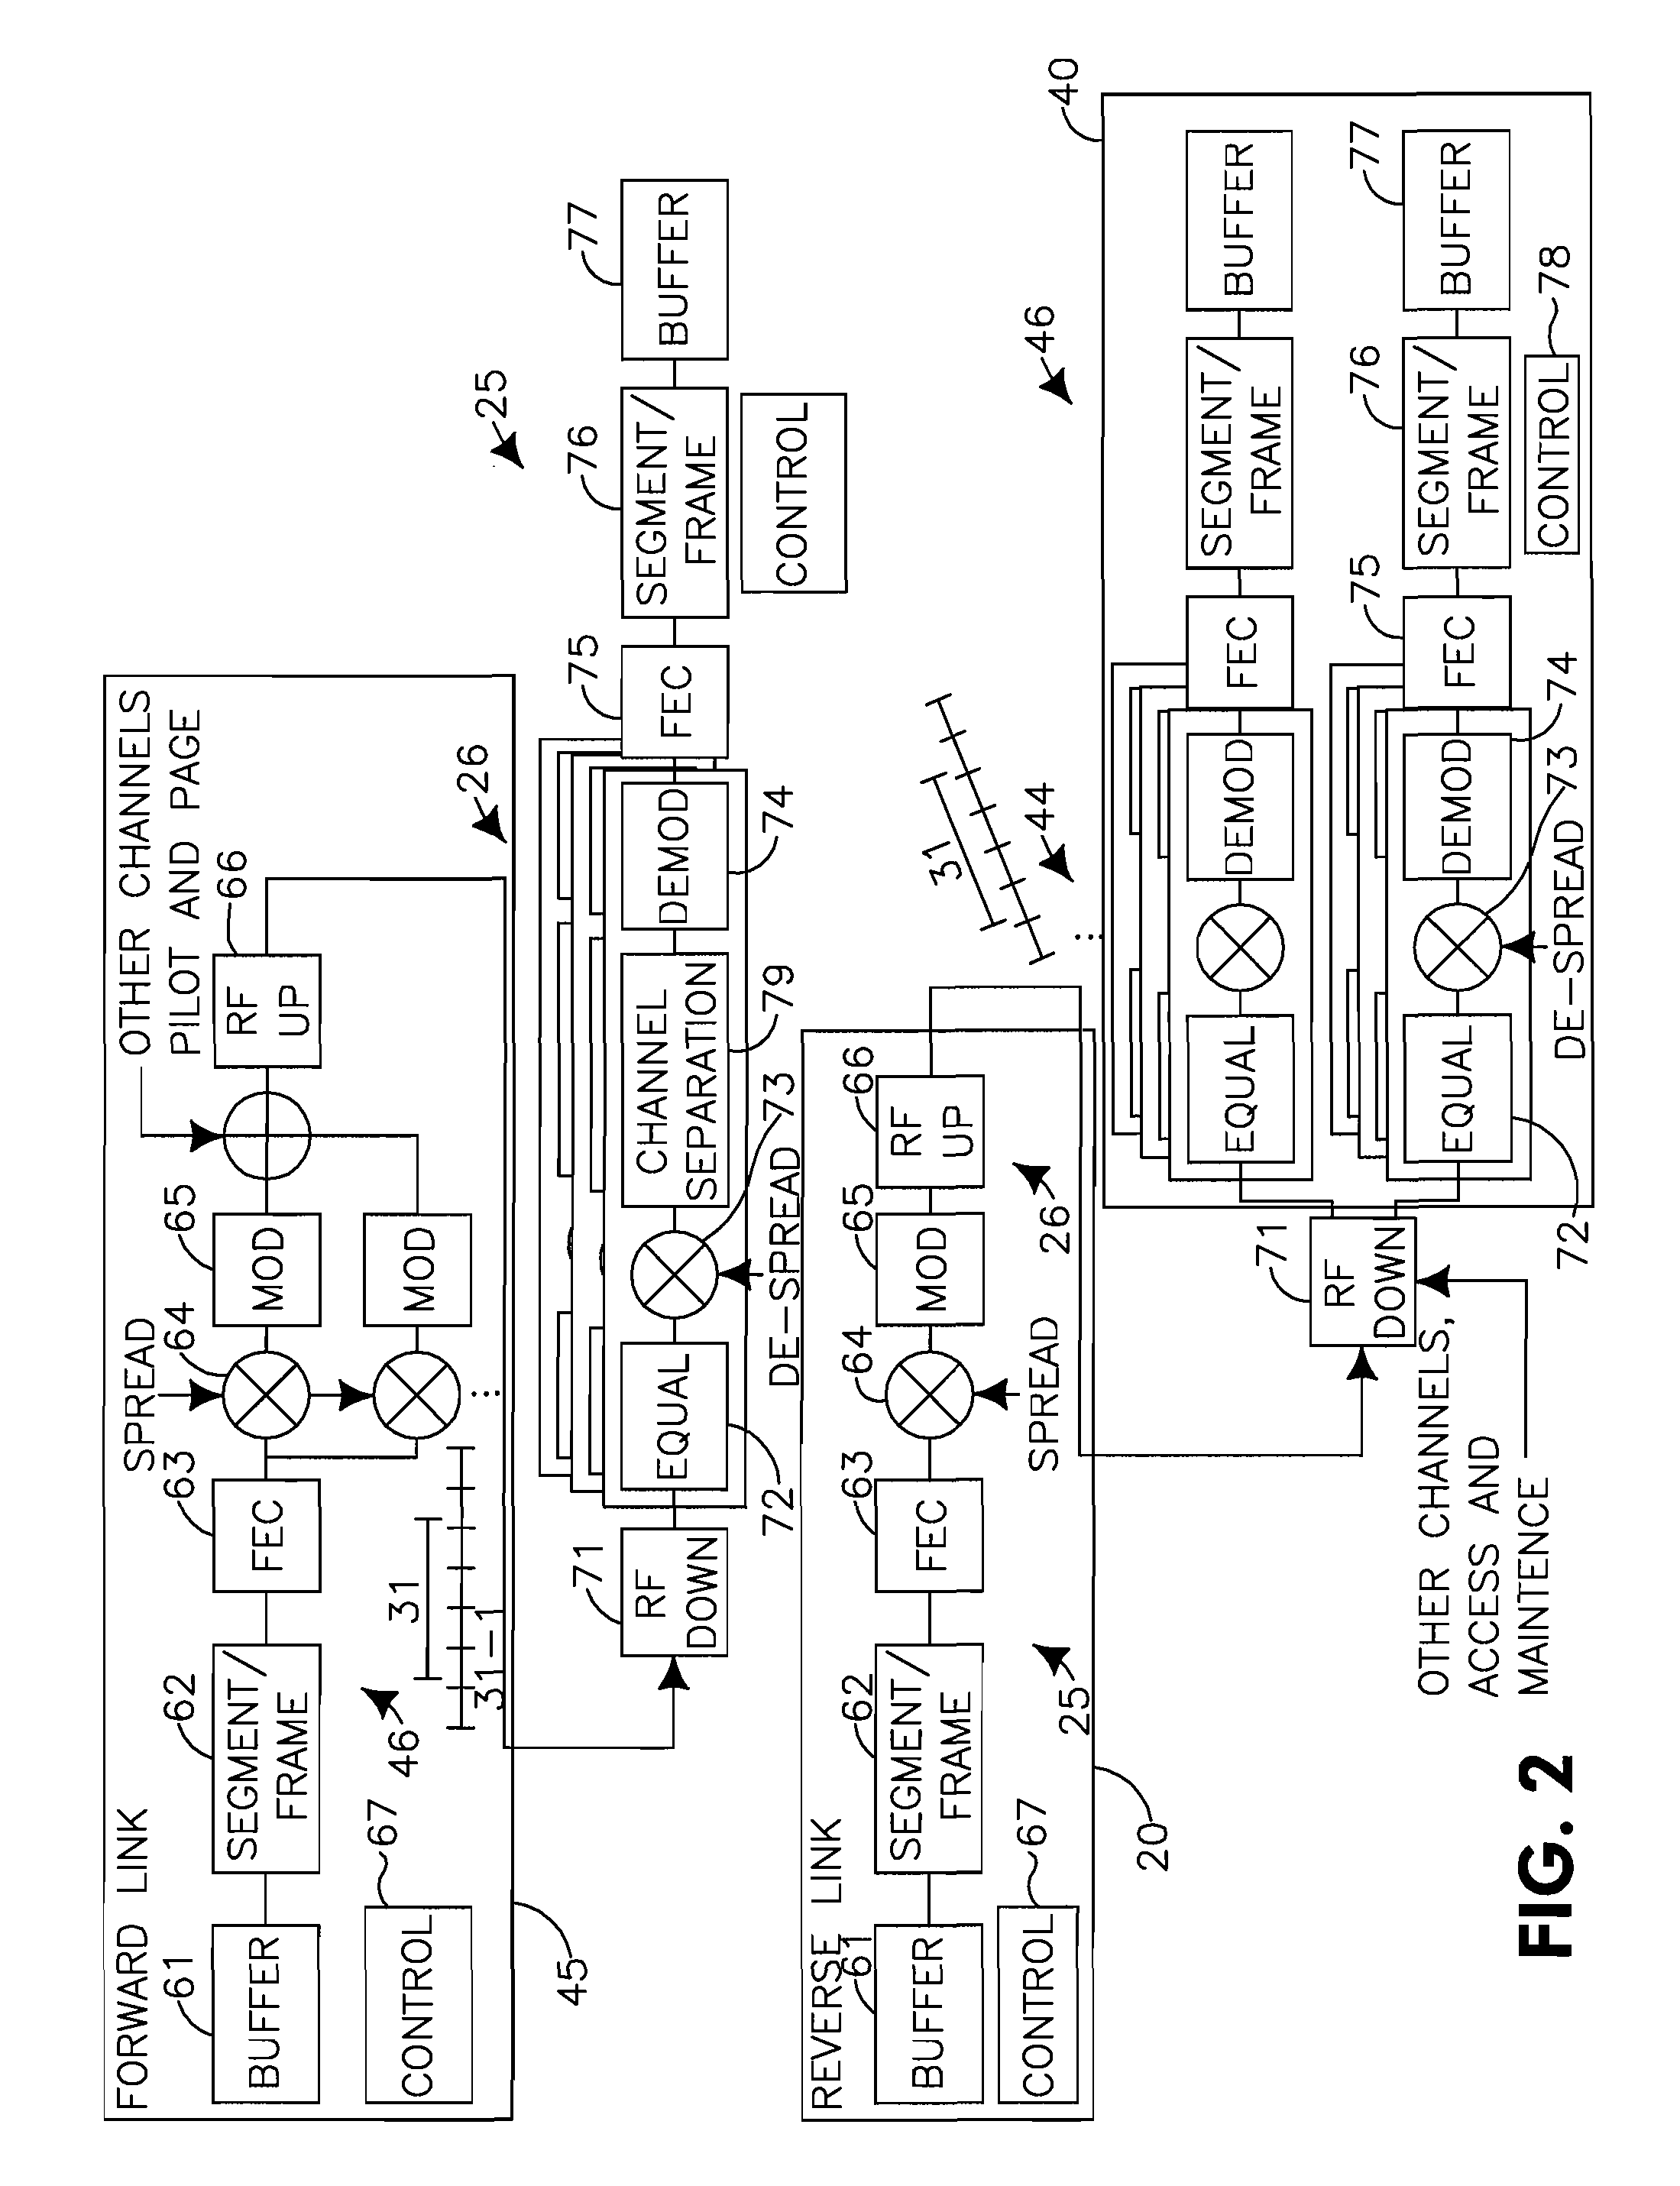 Variable rate coding for enabling high performance communication